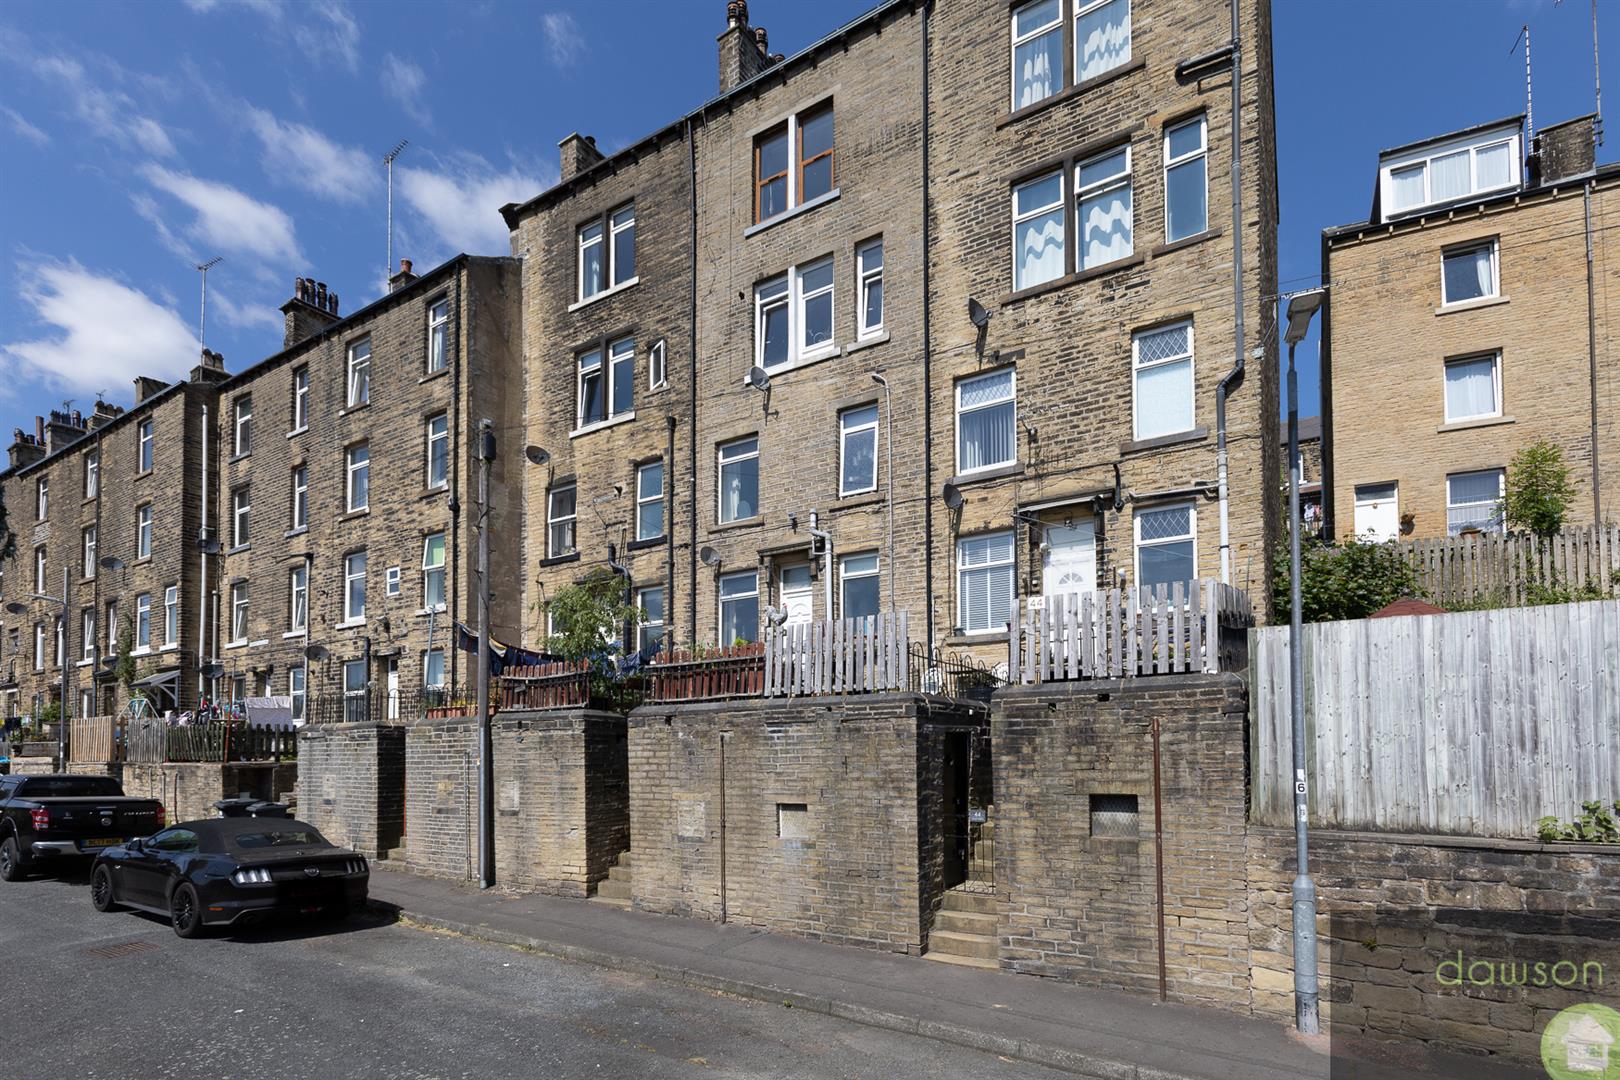 1 bed terraced house for sale in Lower Hollins, Sowerby Bridge, HX6 